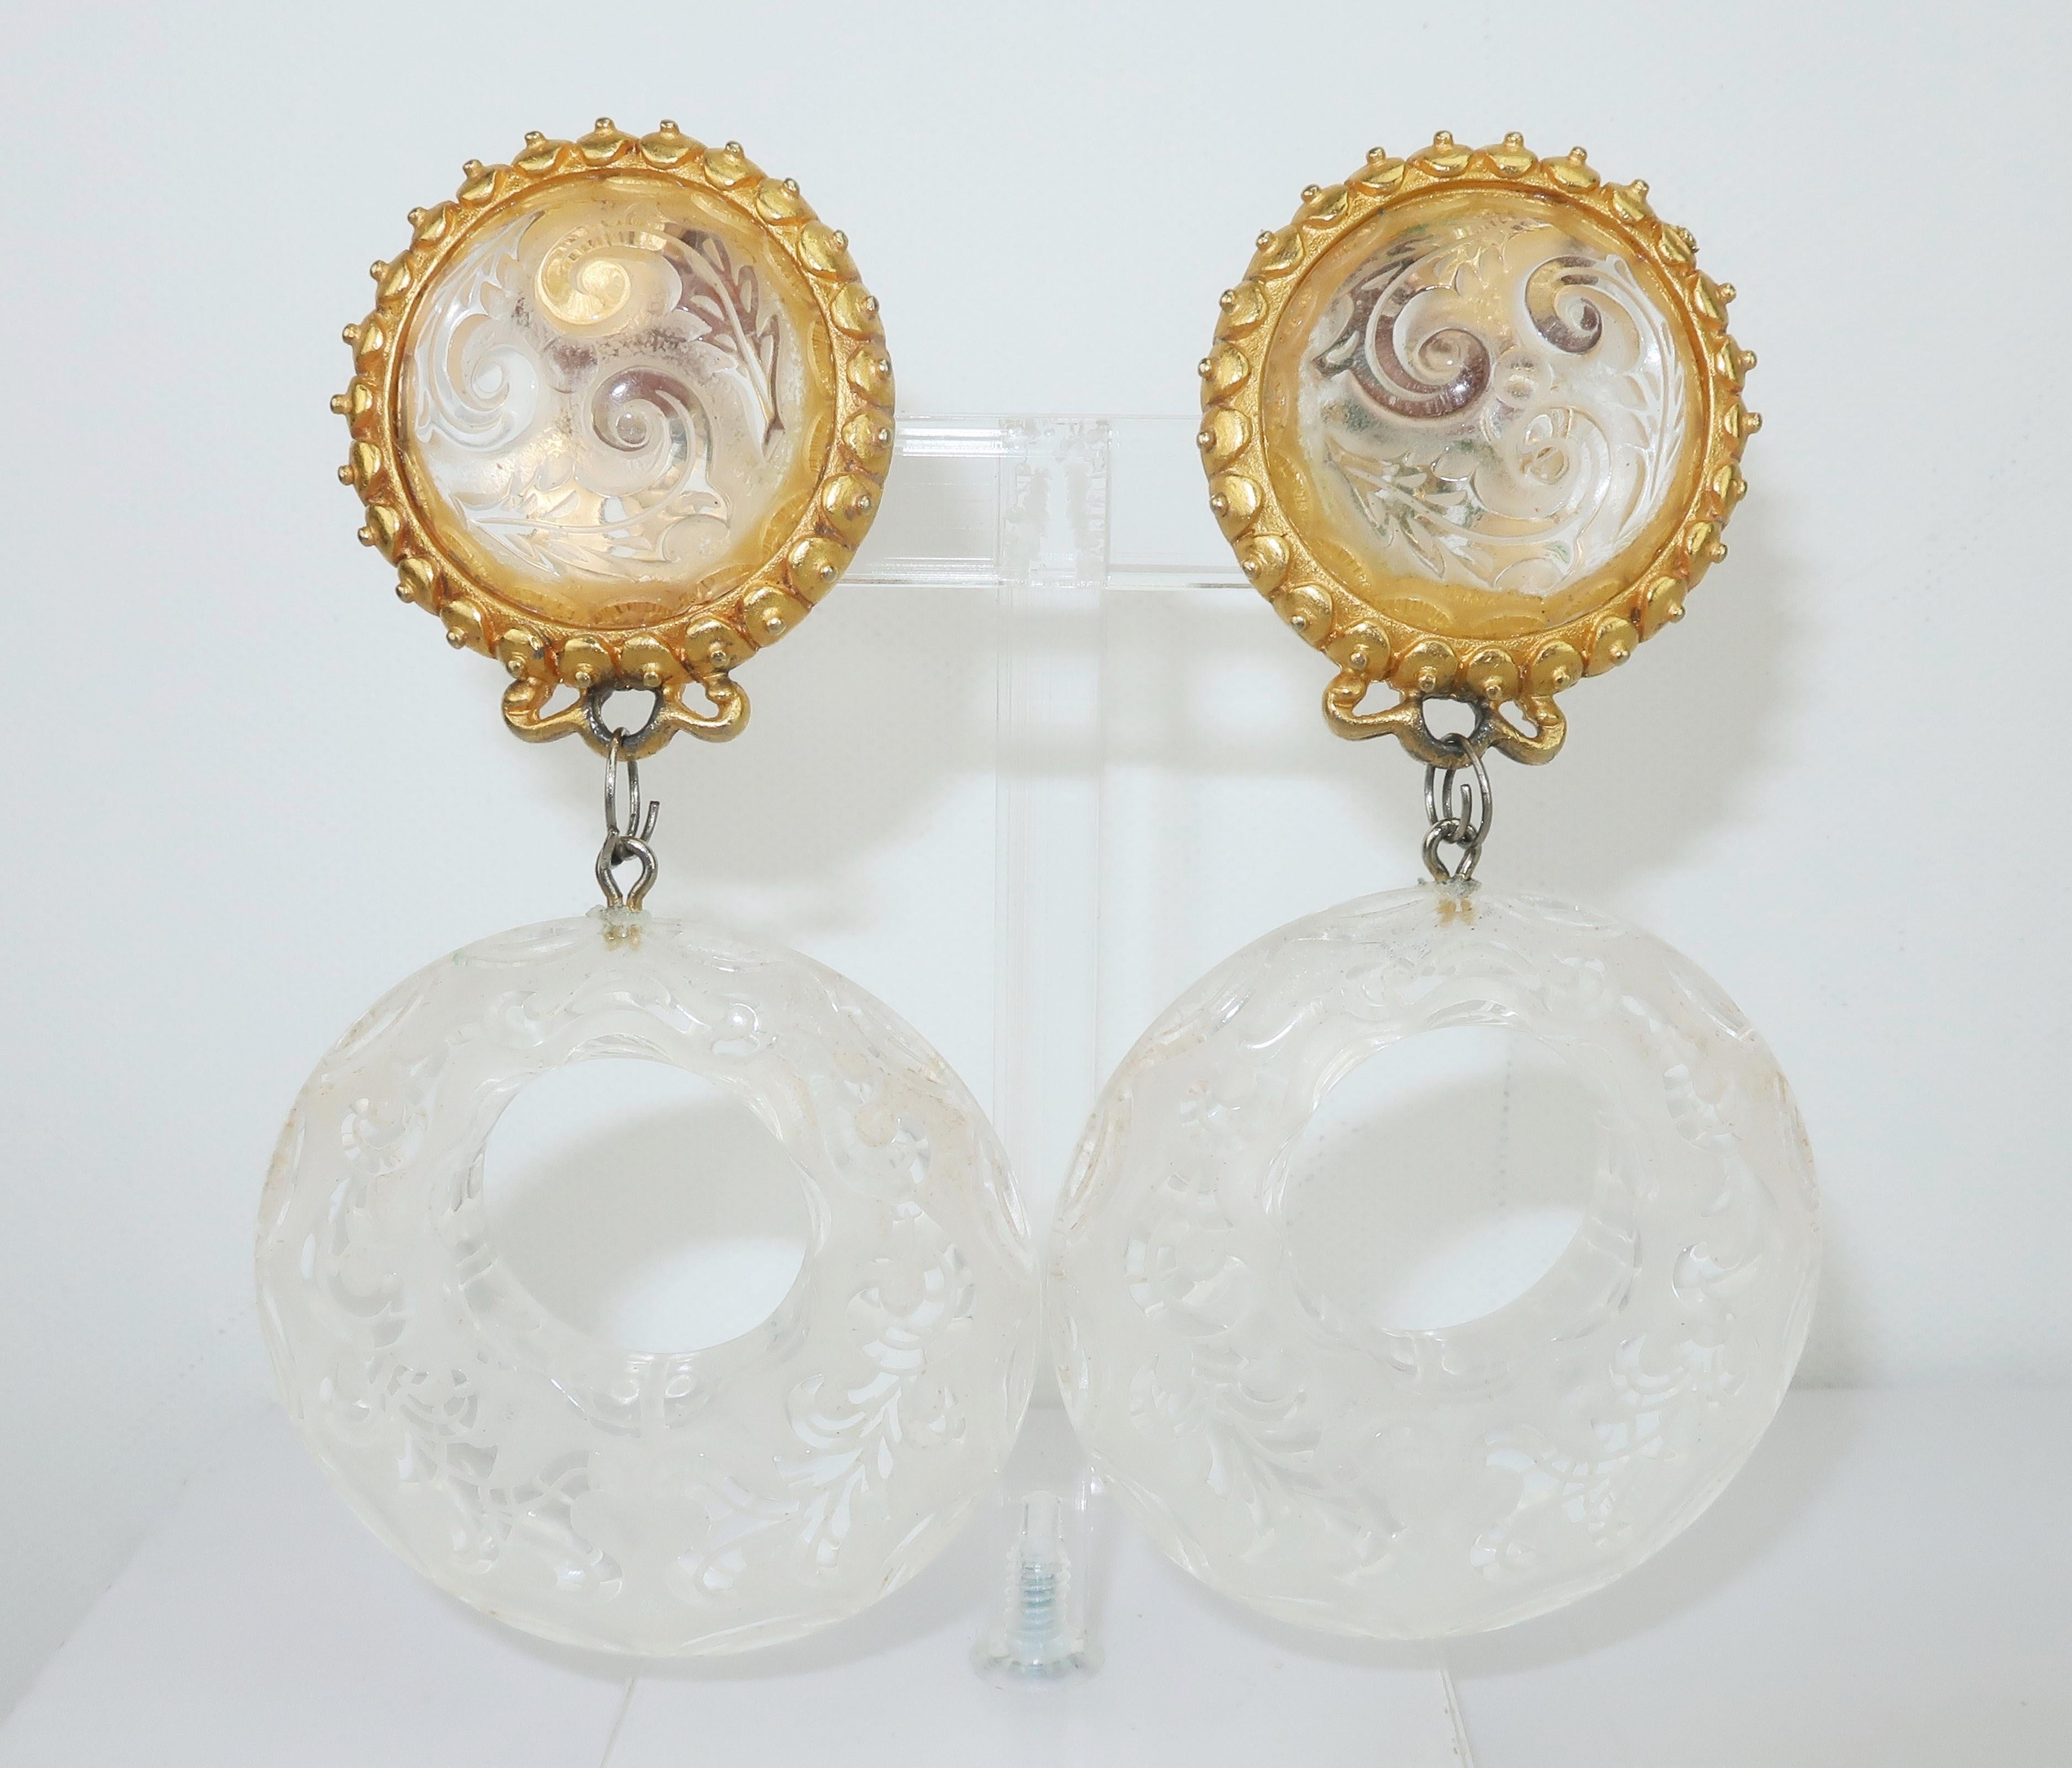 Leslie Block blends baroque opulence and 1980's glam with these carved lucite hoop dangle earrings.  The gold tone setting offers comfortable clip on hardware.  Signed at the back of one earring.
CONDITION
Overall good to fair condition with some